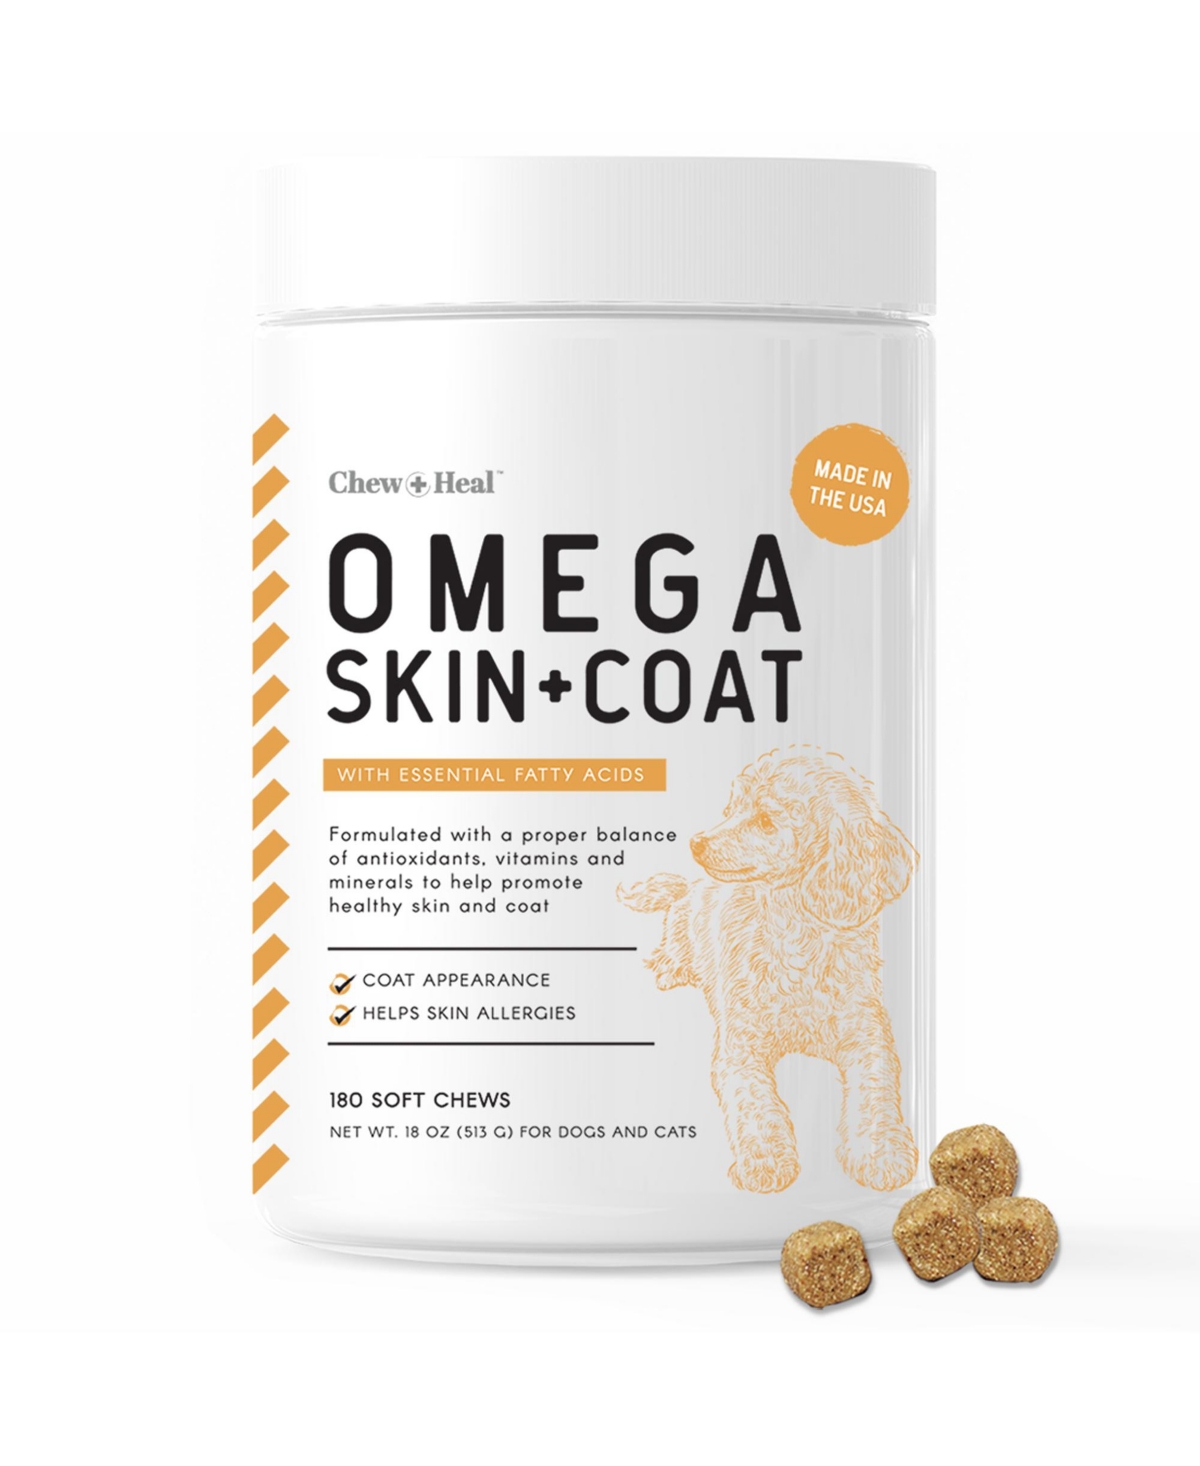 Omega Skin + Coat Fish Oil Supplement for Dogs - 180 Delicious Chews